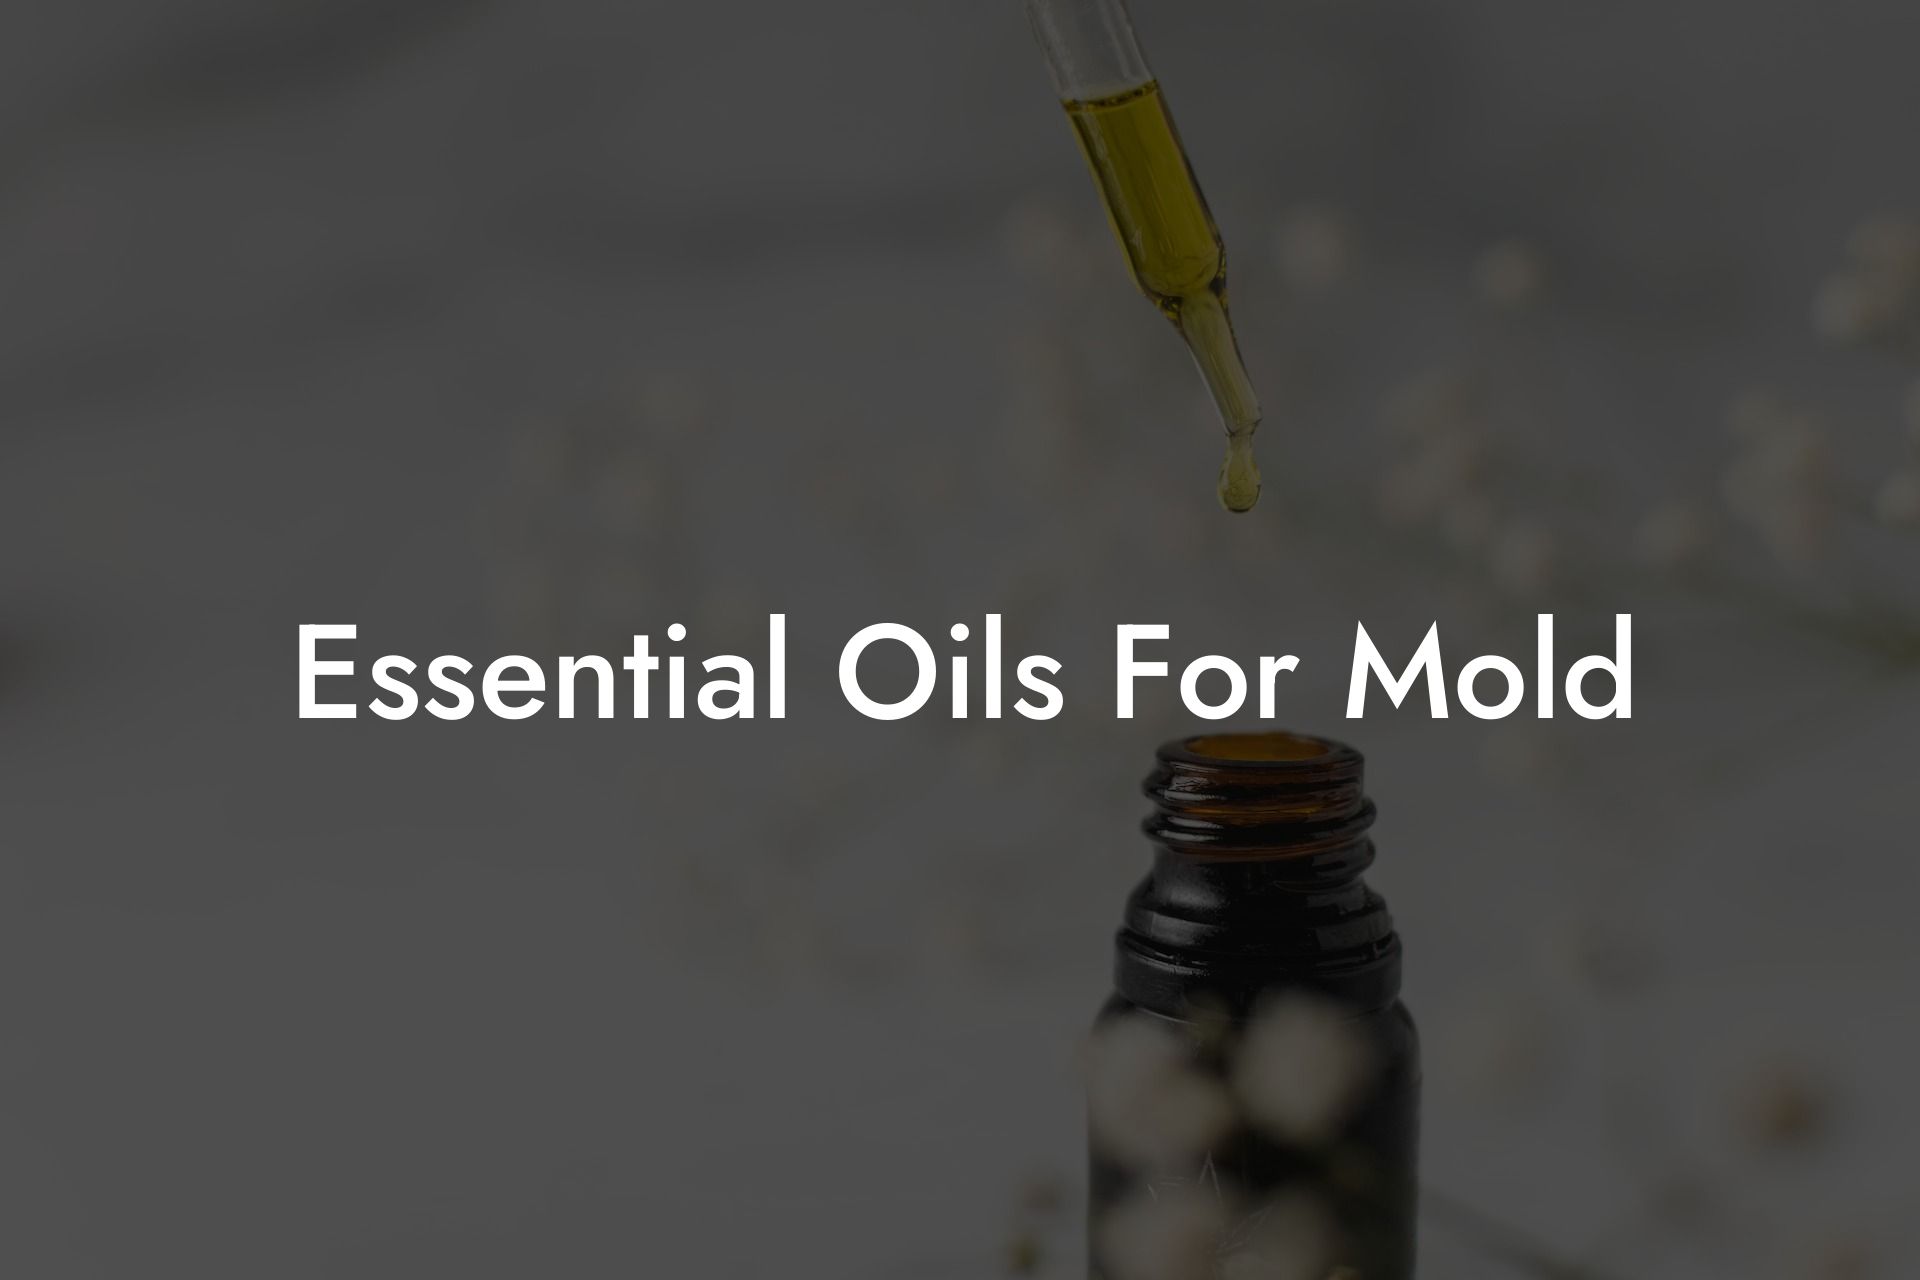 Essential Oils For Mold